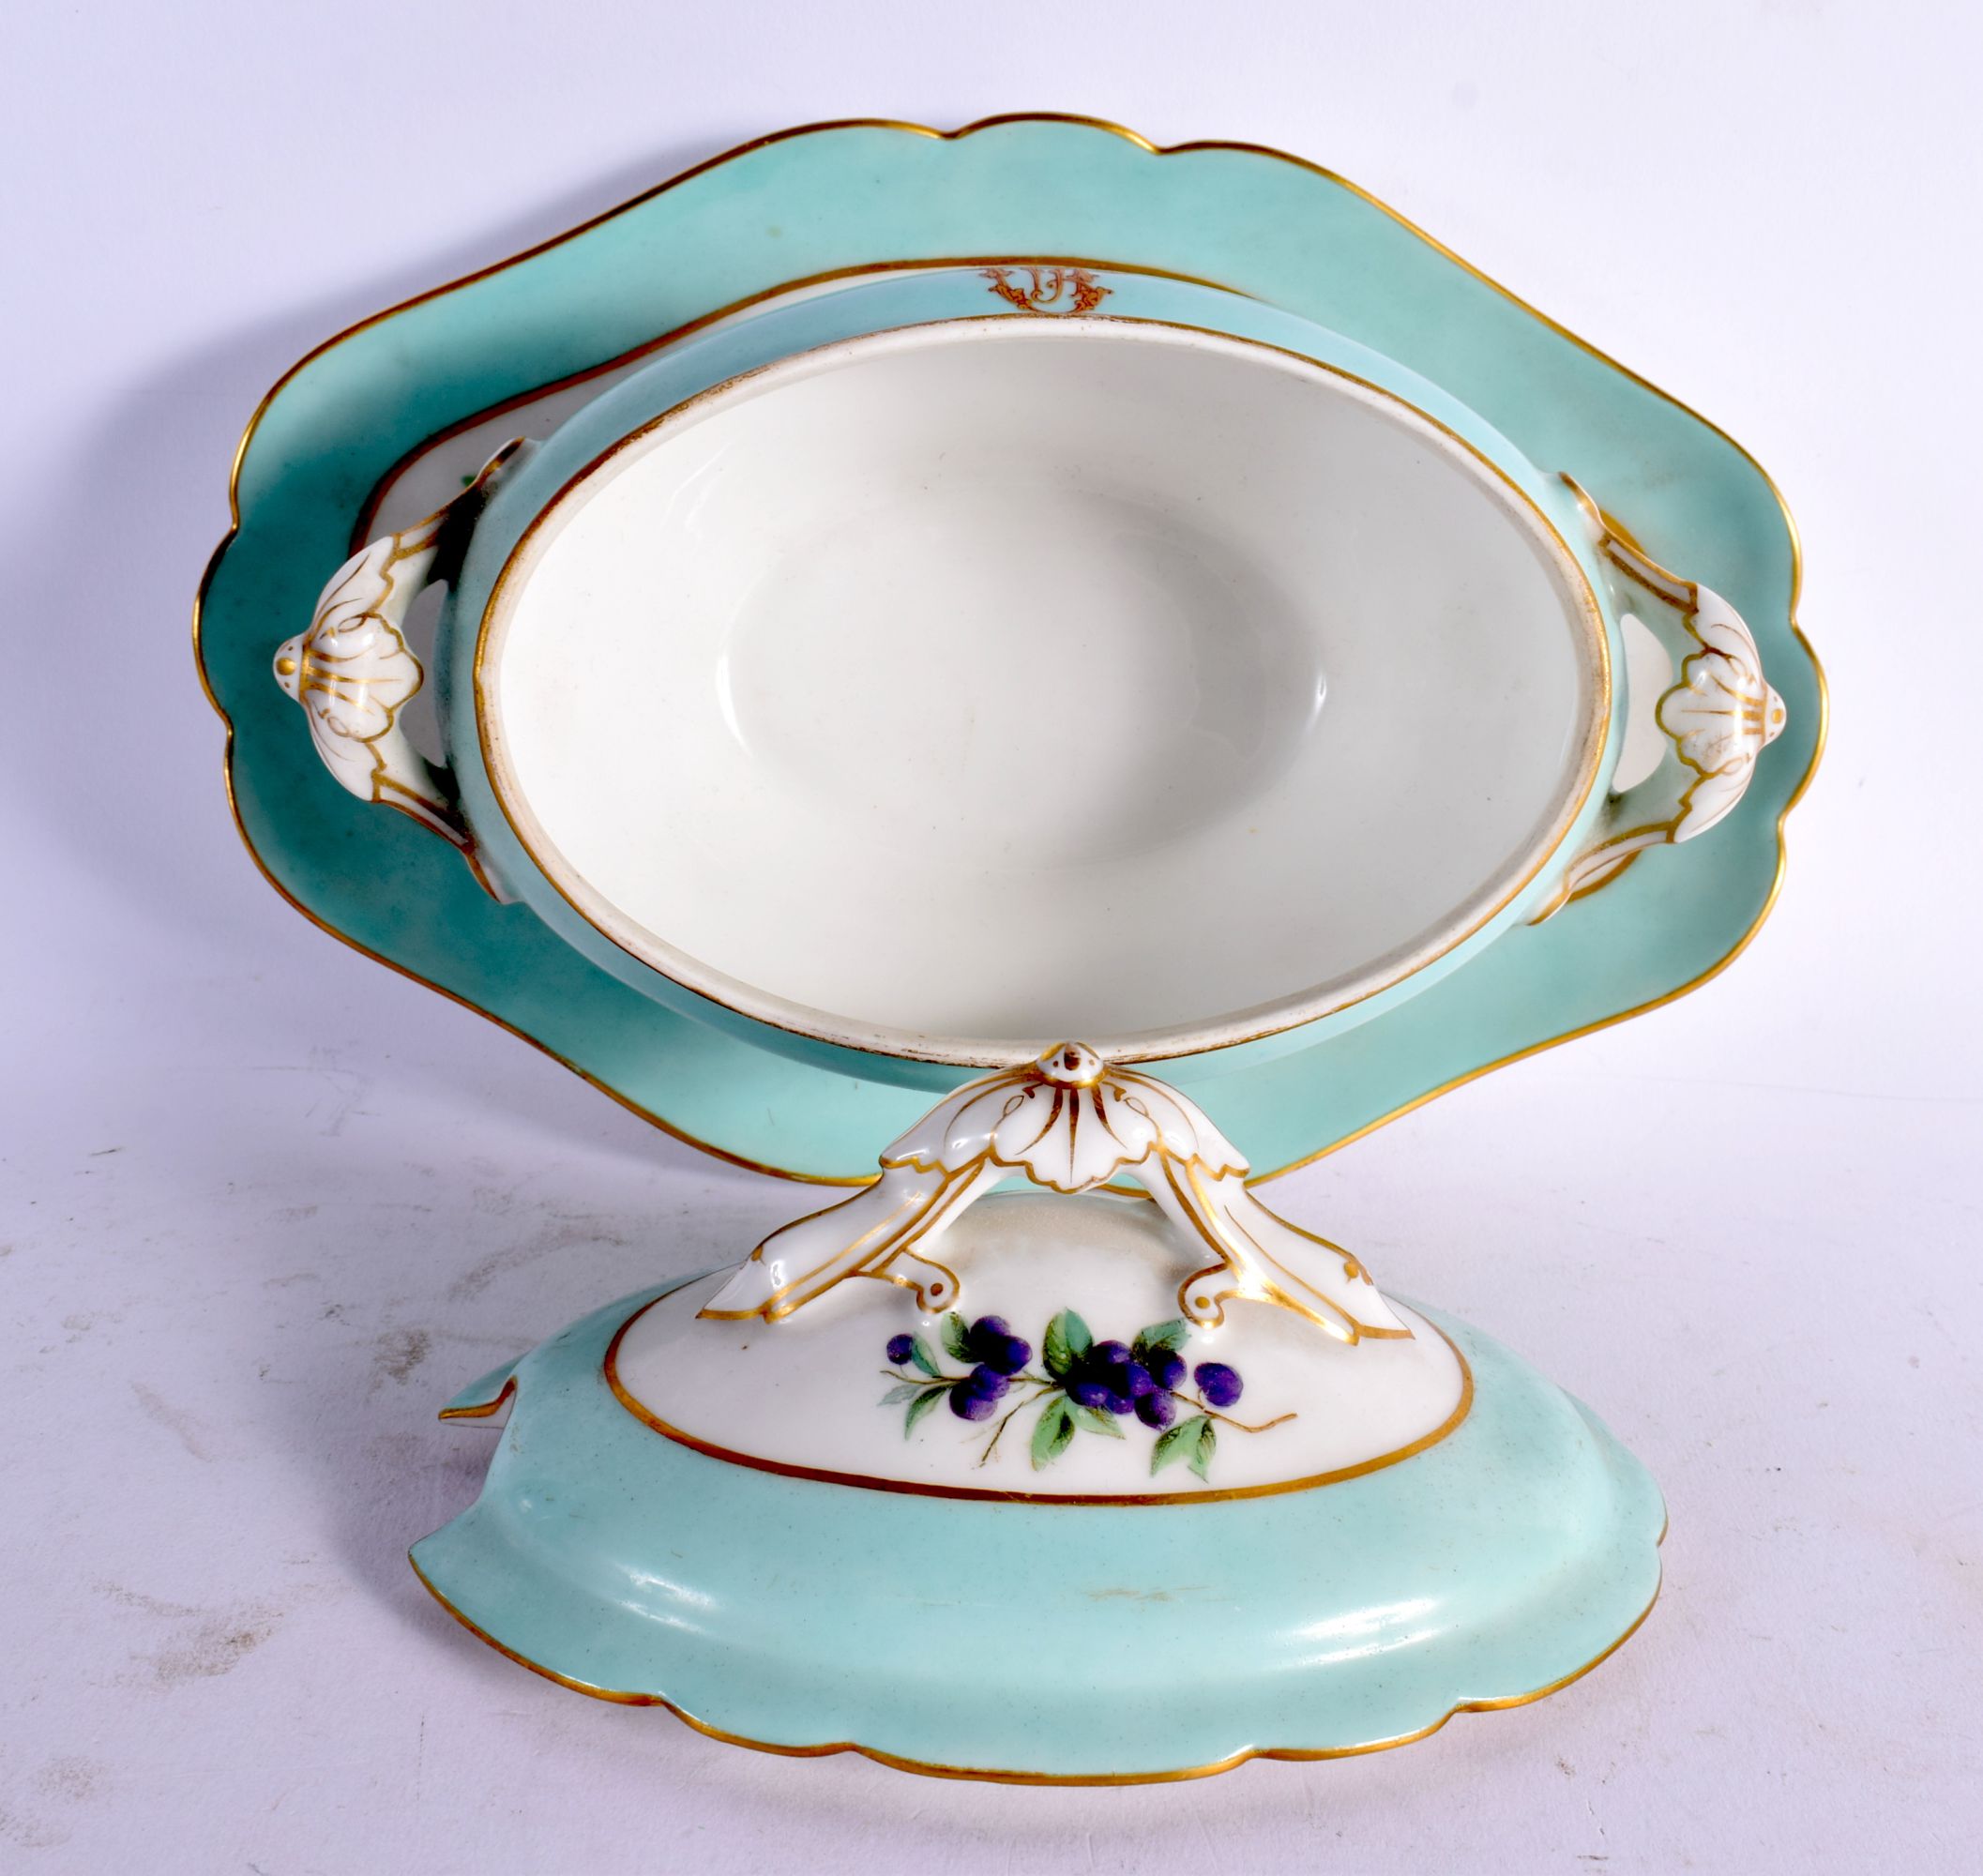 A LARGE AND EXTENSIVE LATE 19TH CENTURY FRENCH PORCELAIN DINNER SERVICE painted with a monogram. Lar - Image 13 of 14